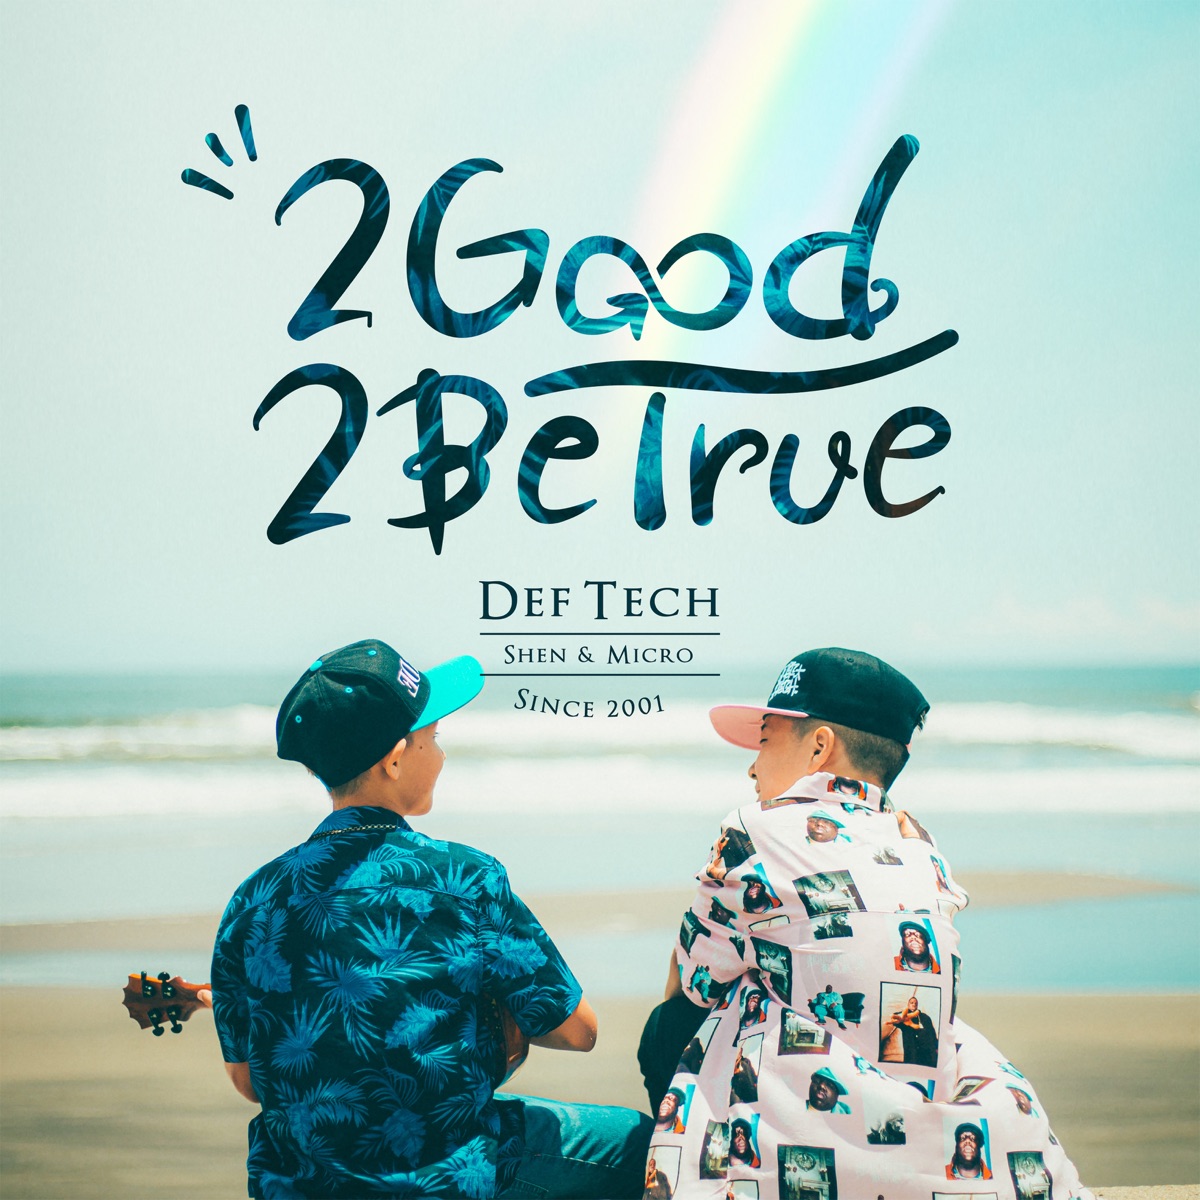 Cover art for『Def Tech - 2 Good 2 Be True』from the release『2 Good 2 Be True